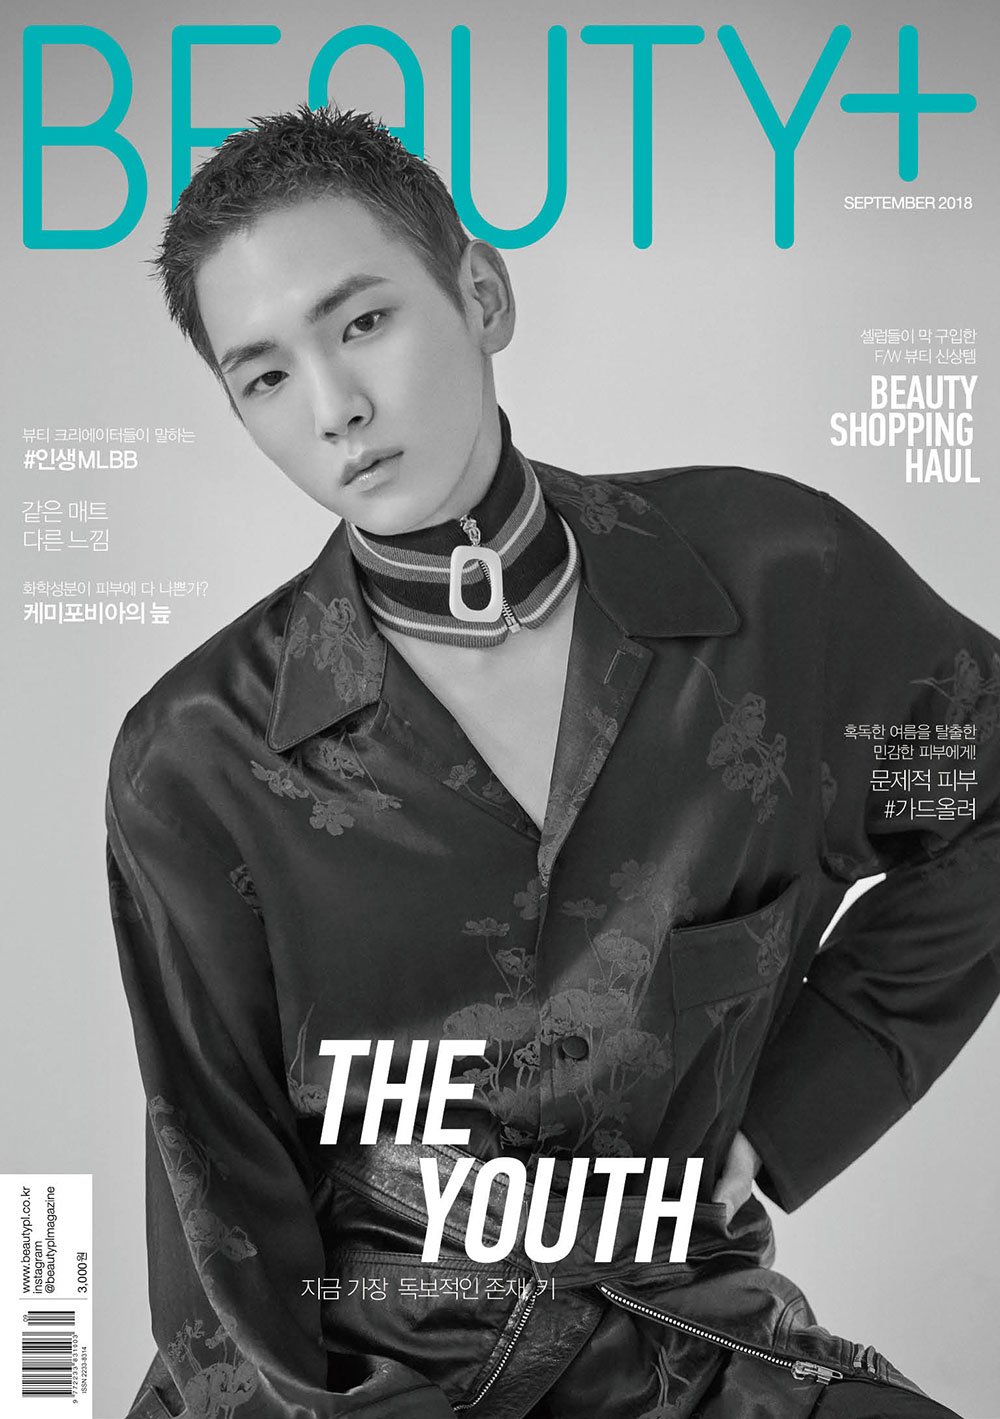 Beauty Magazine BeautyClean has released a picture of SHINee Key, a unique charm. This picture featured the cover of the September issue of BeautyClean.SHINee key, who recently filmed the movie Run and Run with actor Gong Hyo Jin and Jo Jung-suk.SHINee Key, which transformed into a short hairstyle for the movie character, completed a brilliant visual picture with a professional pose as a pictorial craftsman.SHINee Key is currently performing as an MC on TVn entertainment Amazing Saturday and is showing off a sense of entertainment.He will also be the host of the only homecoming talk show Cheongdam Keichin in September, and will attract viewers with the charm of Yose-nam (a sexy man who cooks well).SHINee Keys pictorials, which digest any concept with their own unique charm, can be found in the September issue of Beauty Magazine BeautyPeace and SNS.Photo: Beauty